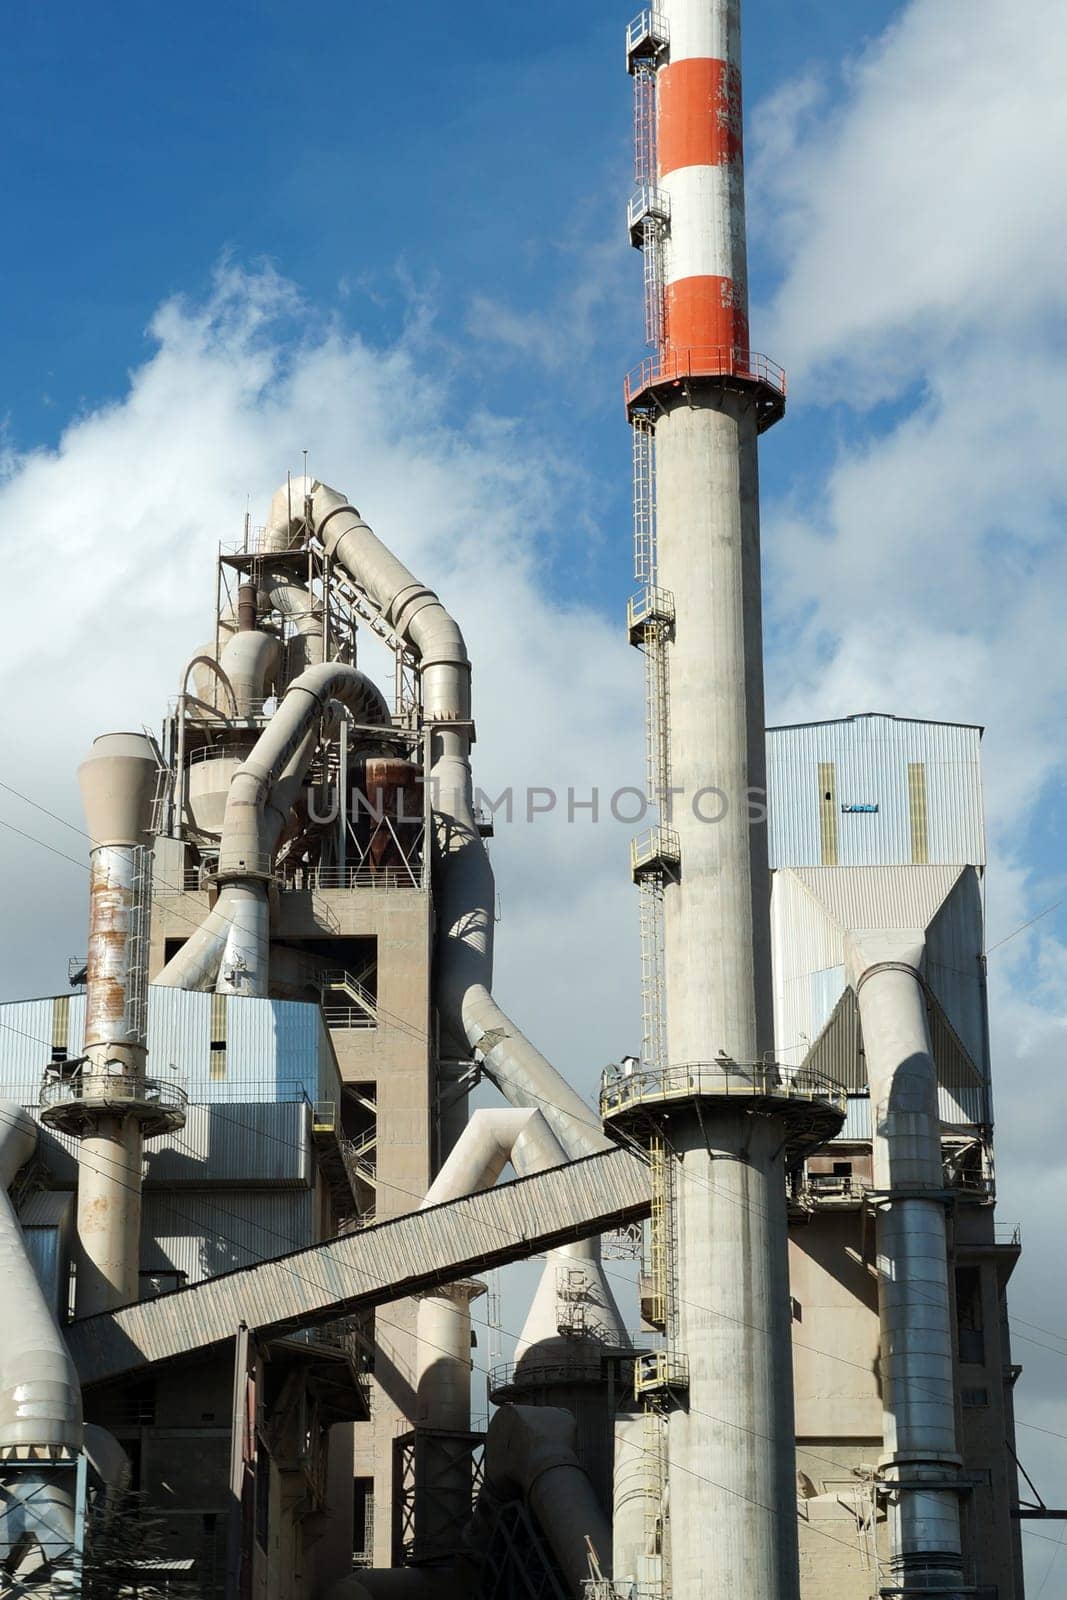 pipes of a cement plant against the background of a cloudy sky close-up by Annado